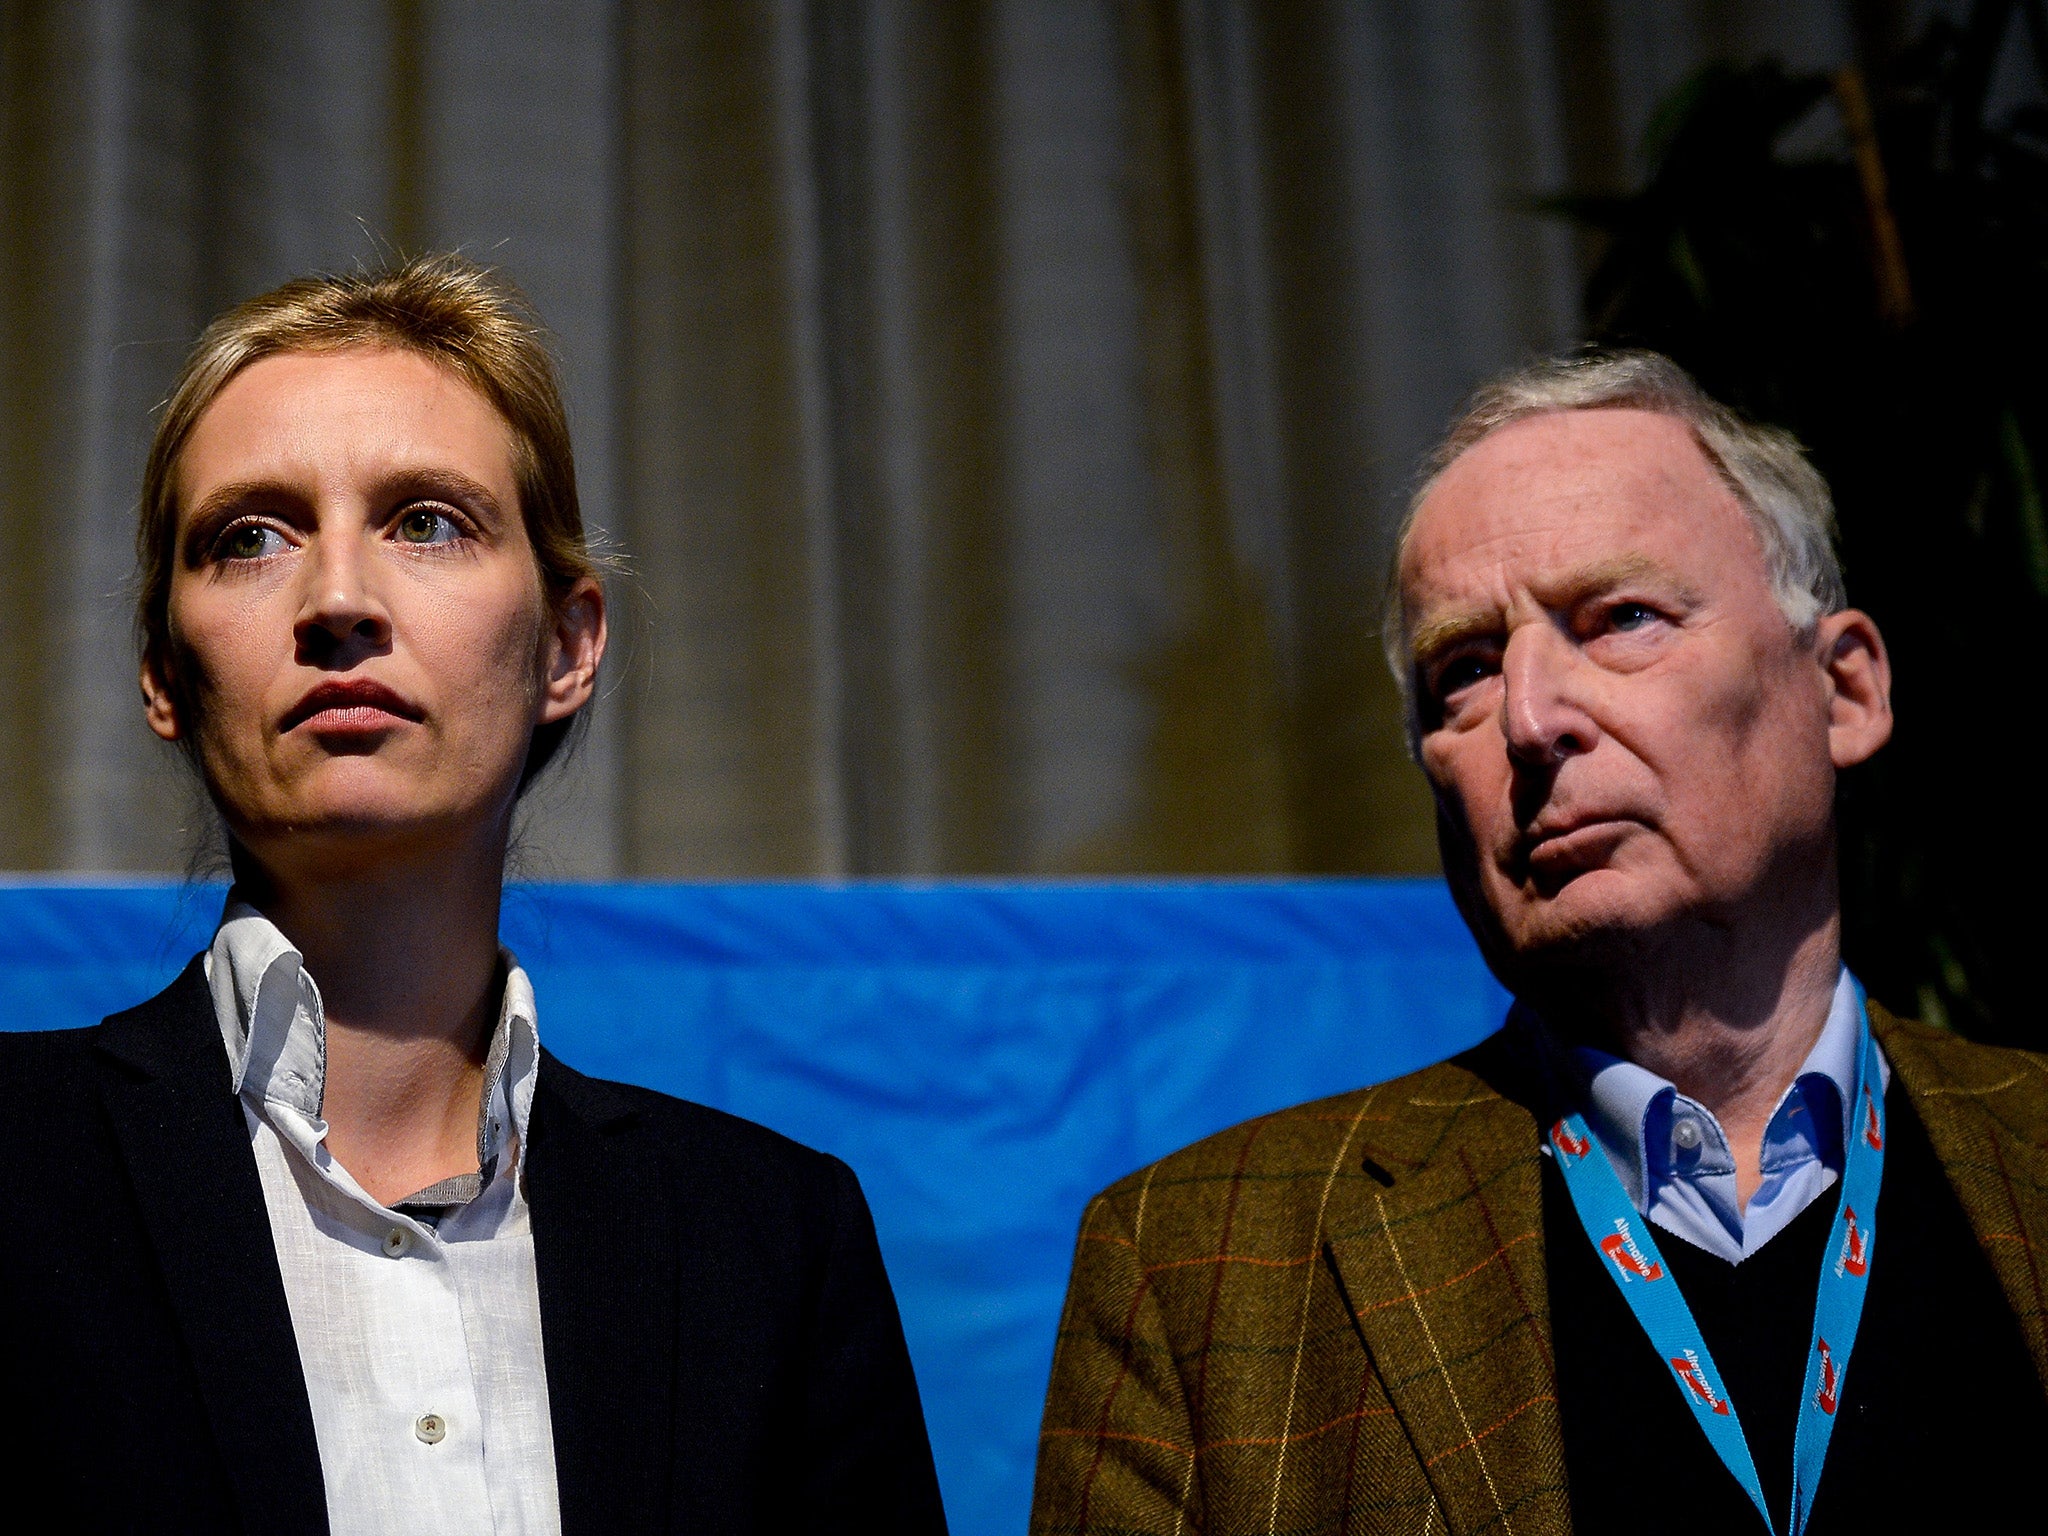 Ms Weidel and Mr Gauland were chosen after the public face of the party Frauke Petry said she would no longer be available